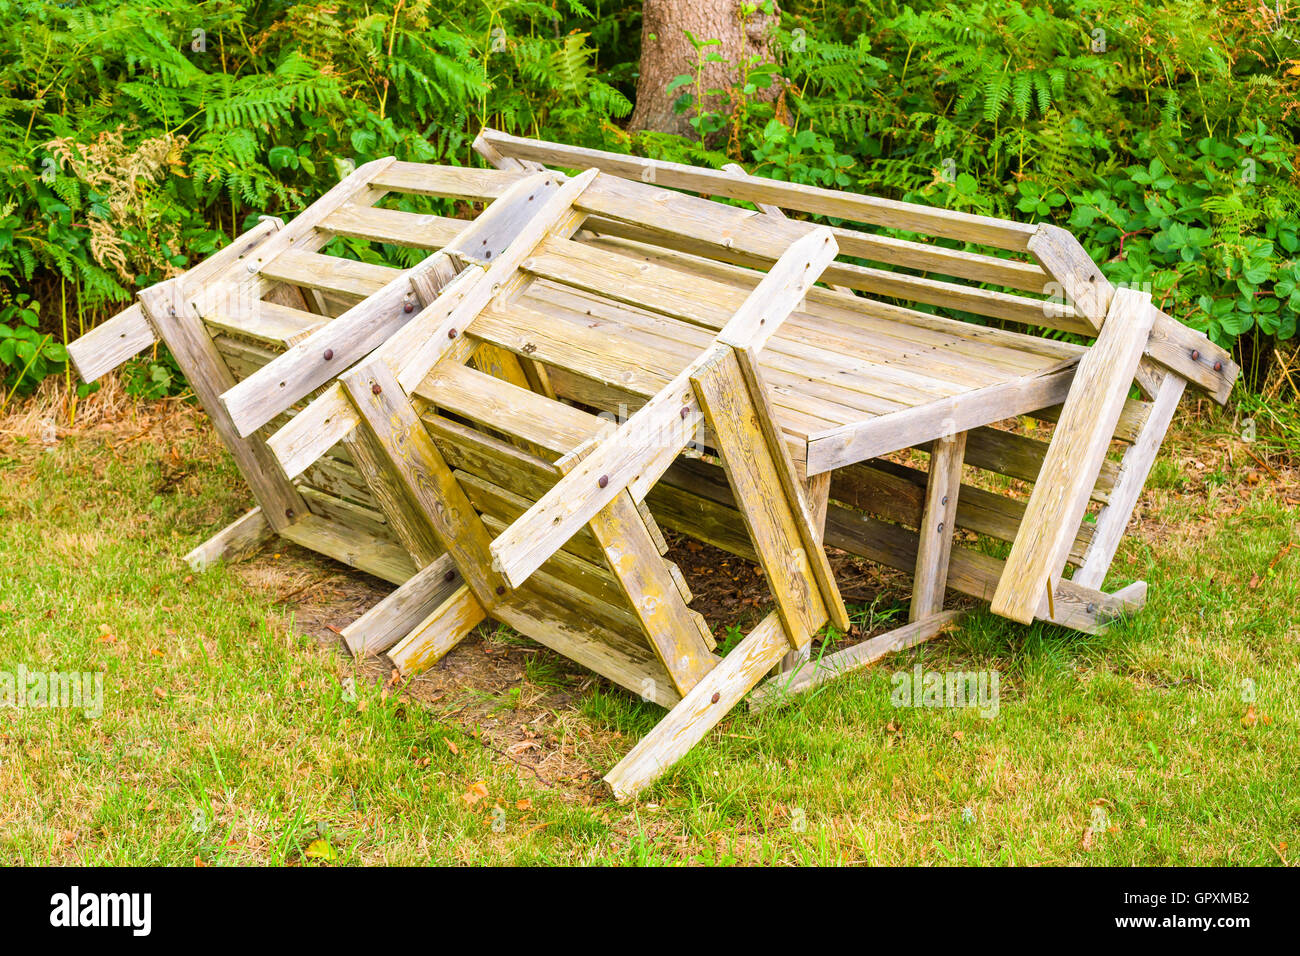 Set of unpainted wooden outdoor furniture on a patch of grass with forest undergrowth in the background. Stock Photo